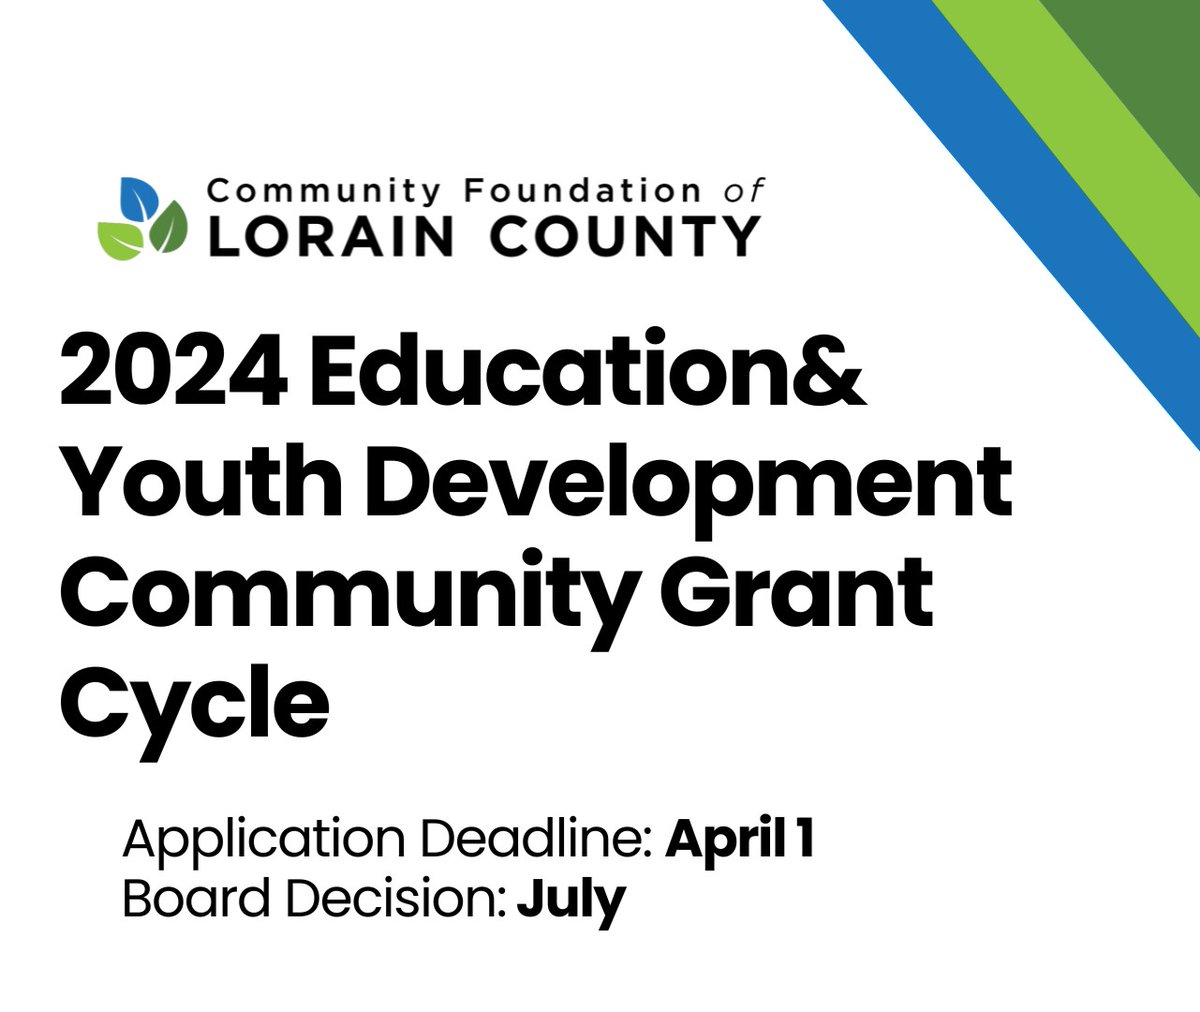 📚Education & Youth Development Community Grant Cycle The cycle opens on March 1, with a deadline of April 1, and awards will be announced in July. Learn more by visiting bit.ly/3n1mnnq. #peoplewhocare #cauesthatmatter